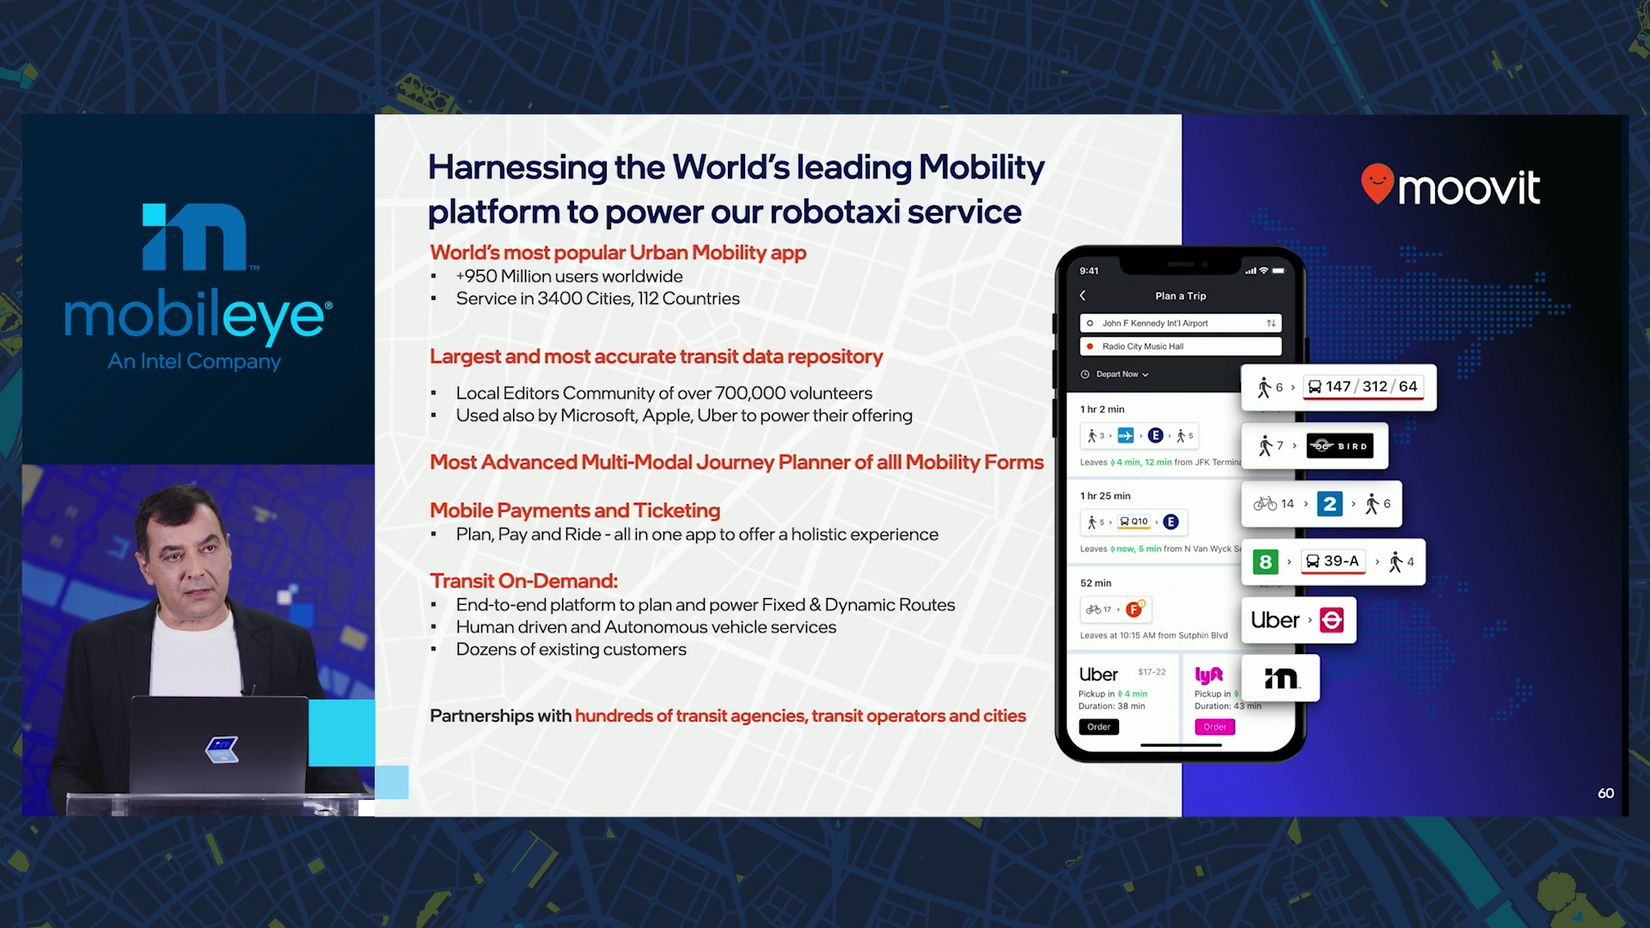 Harnessing the world's leading mobility platform to power our robotaxi service